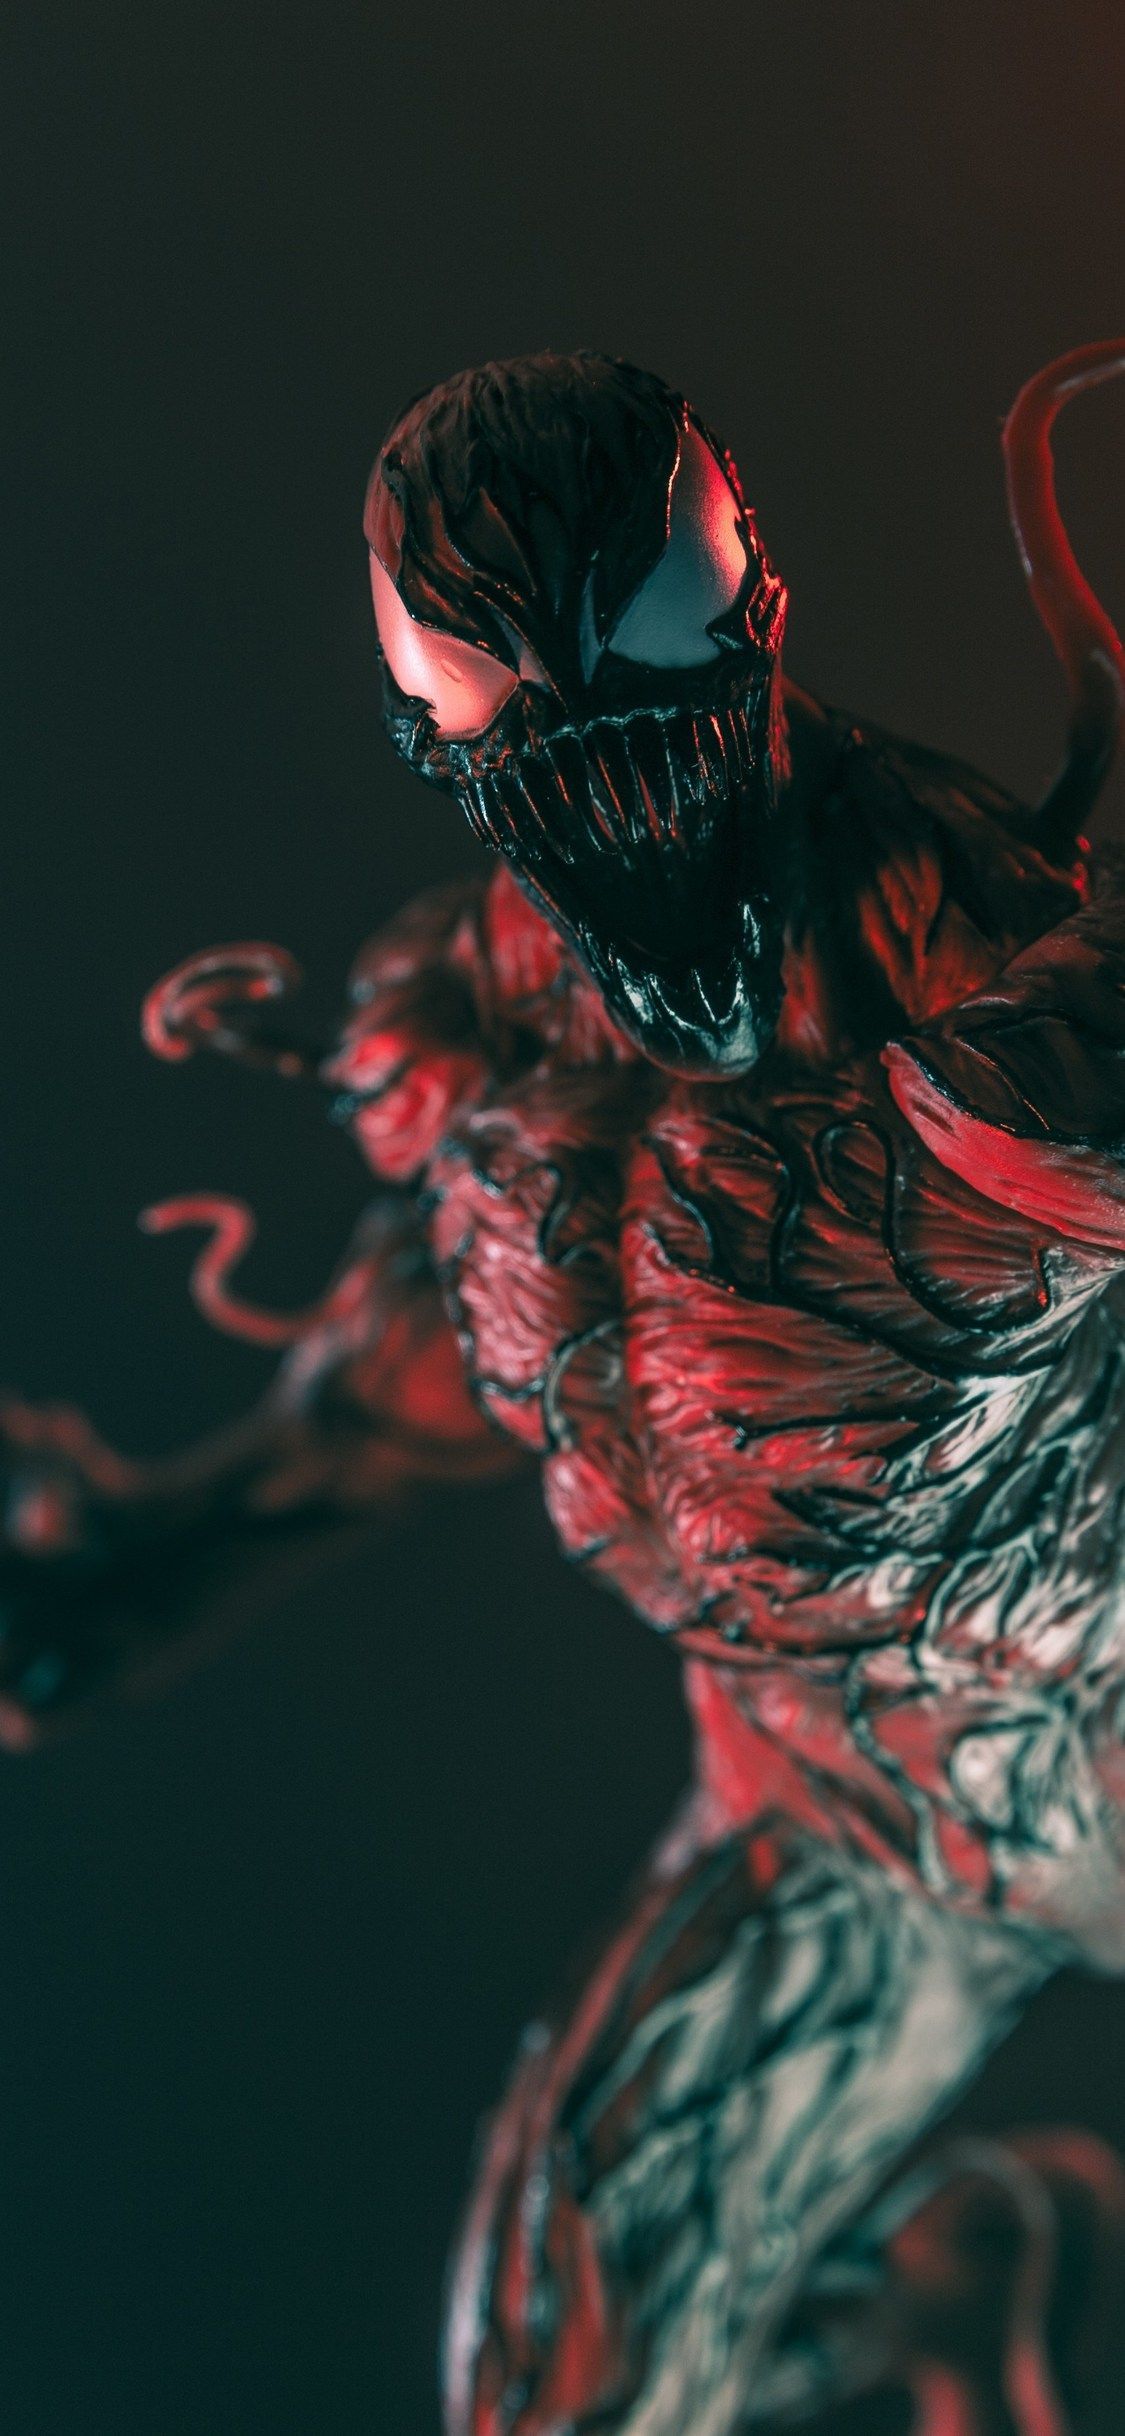 Venom Let There Be Carnage 4k Ultra HD Wallpaper